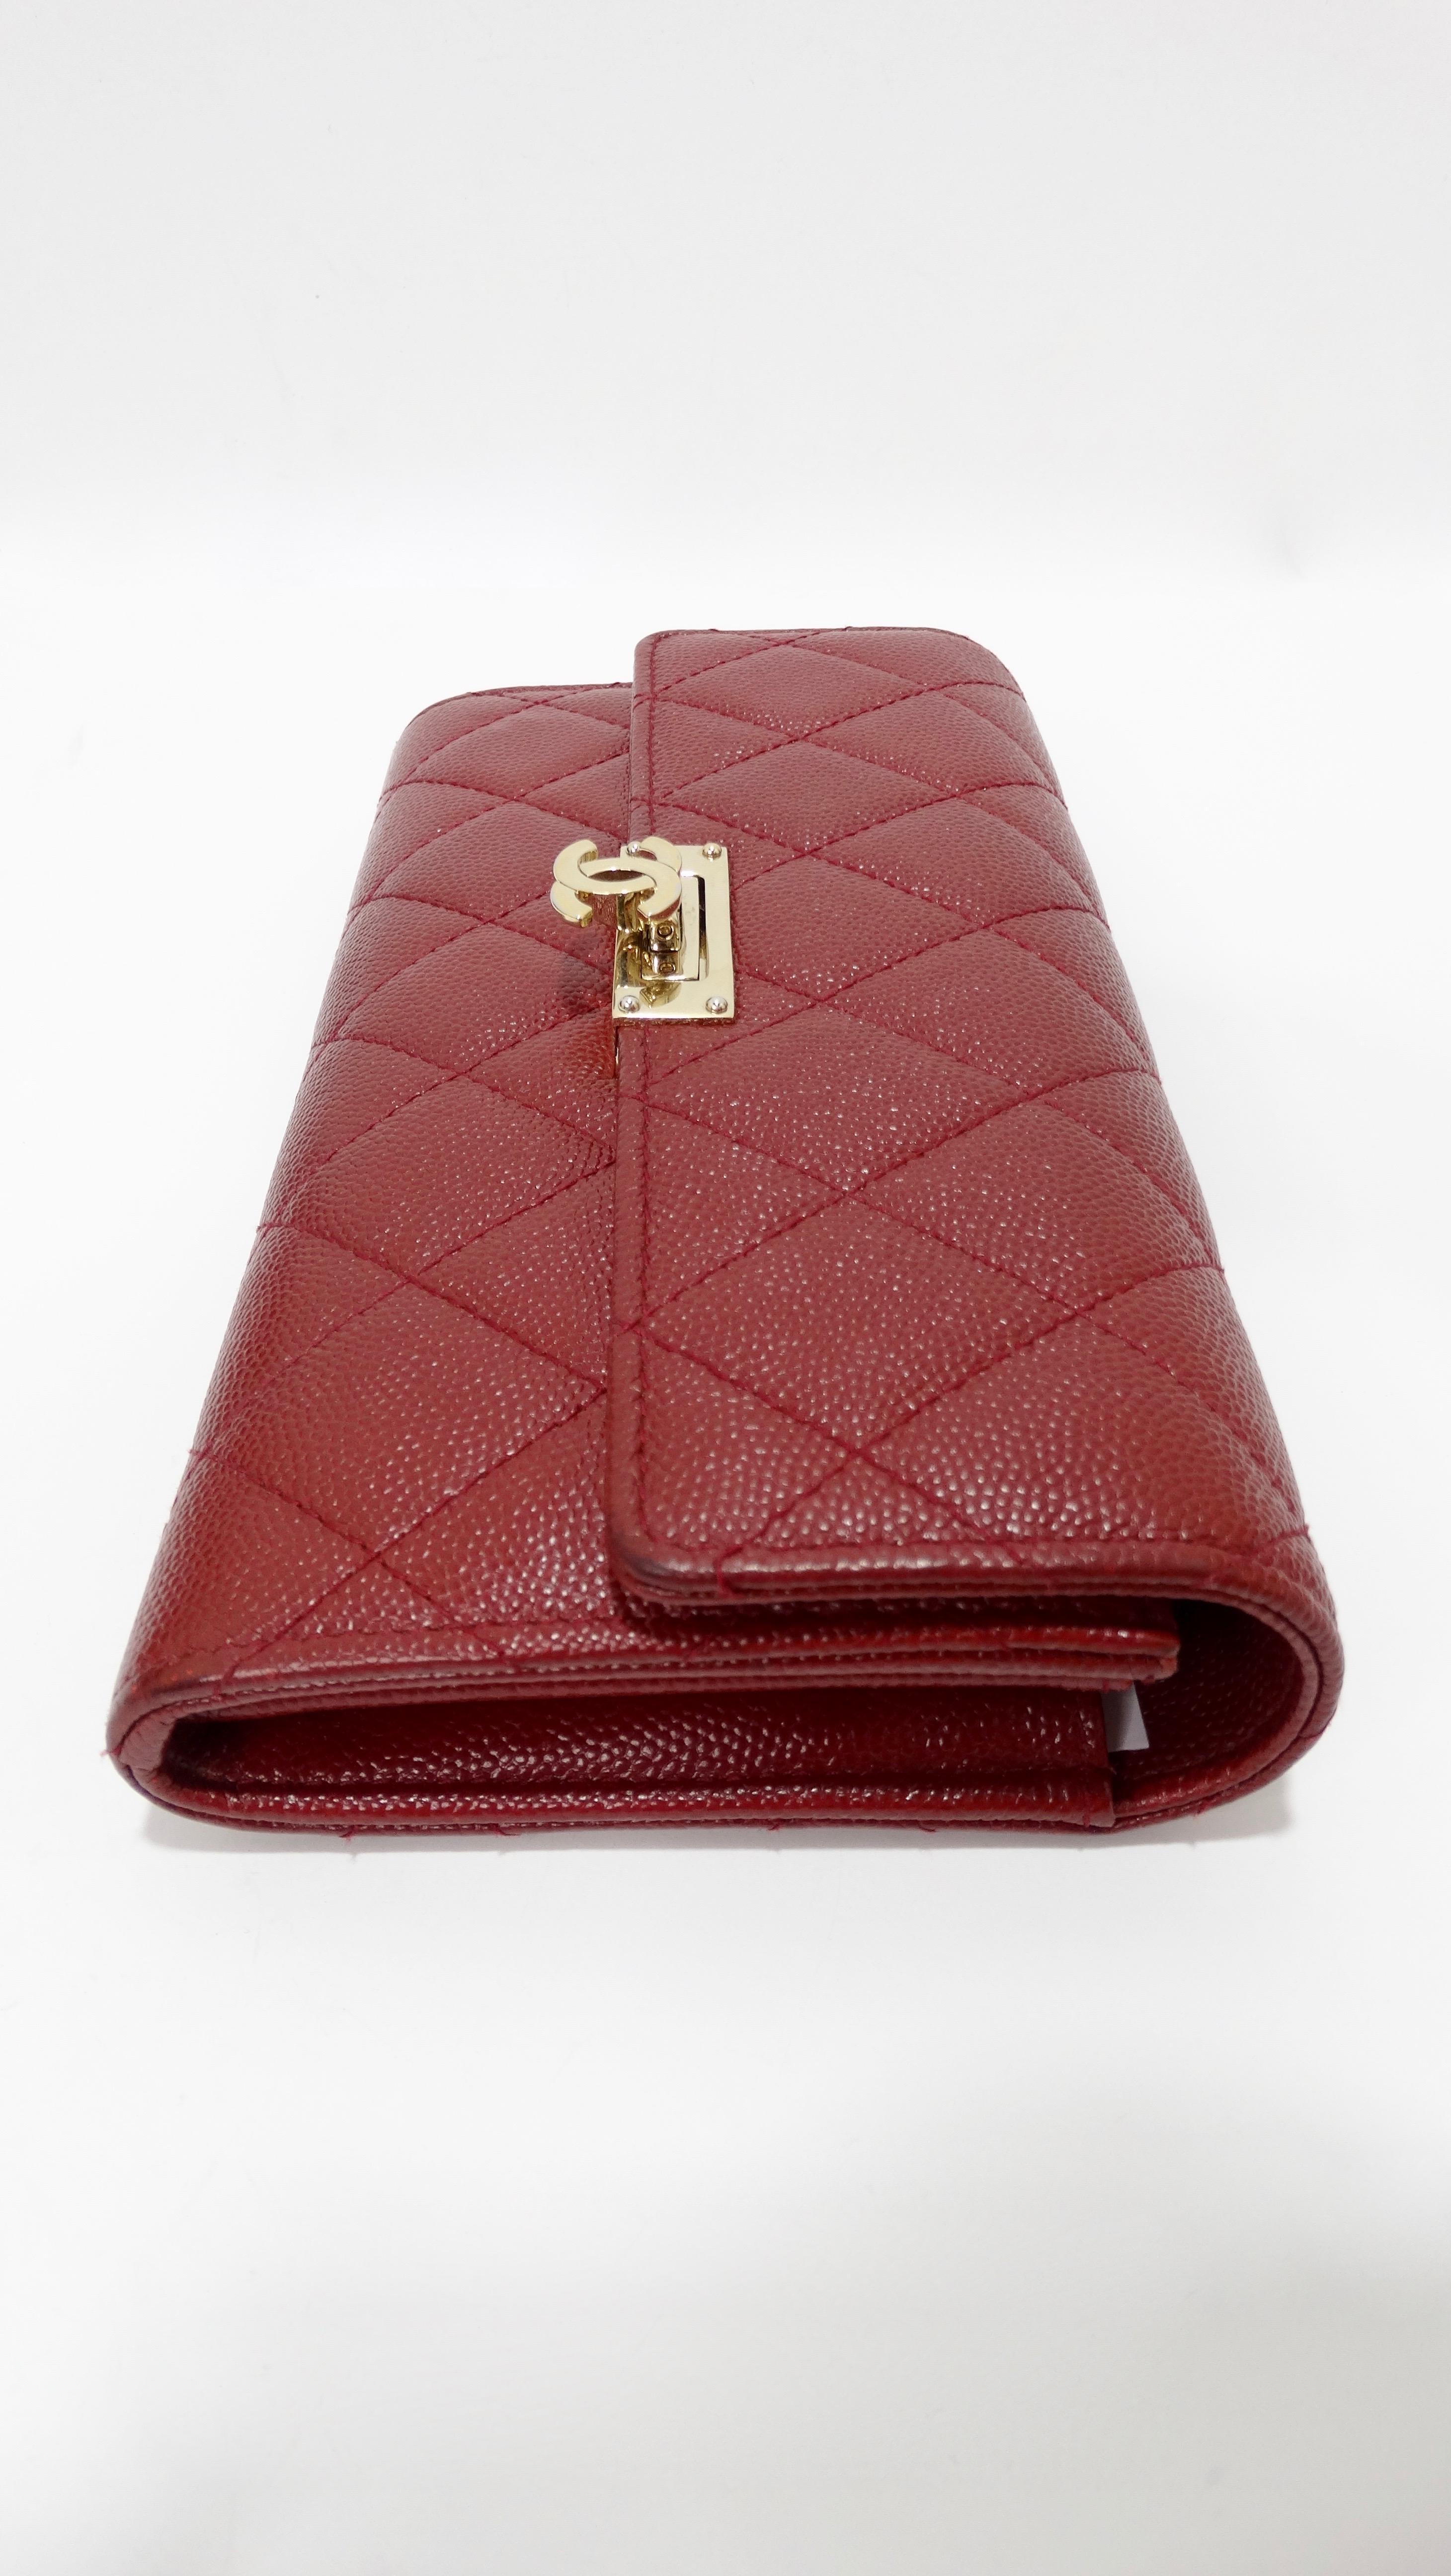 Your new everyday wallet is here! Circa 2018, this Chanel gusset wallet is crafted from lipstick red caviar leather and features Chanel's signature quilted stitching, gold hardware and a CC closure. Interior is lined with tonal soft leather and is